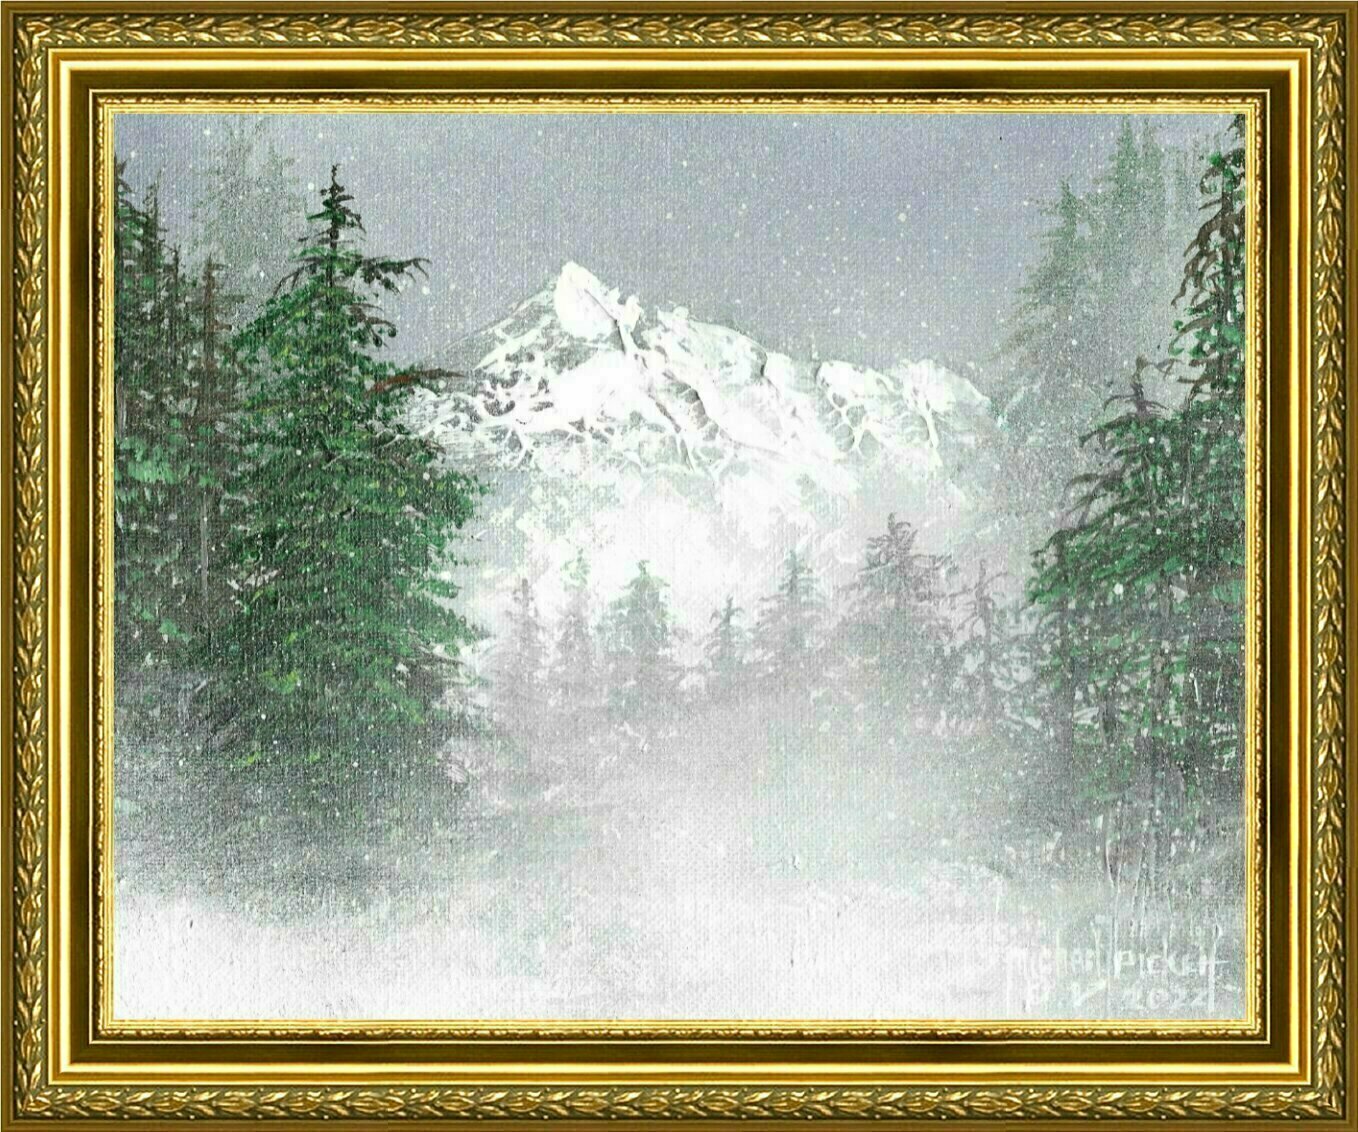 Michael Pickett, 'Mountain And Trees', 2022, original Painting Acrylic, 8 x 10  x 1 inches. Artwork description: 1911 Steak knife used as a pallet knife, Brush and spray paint. ...